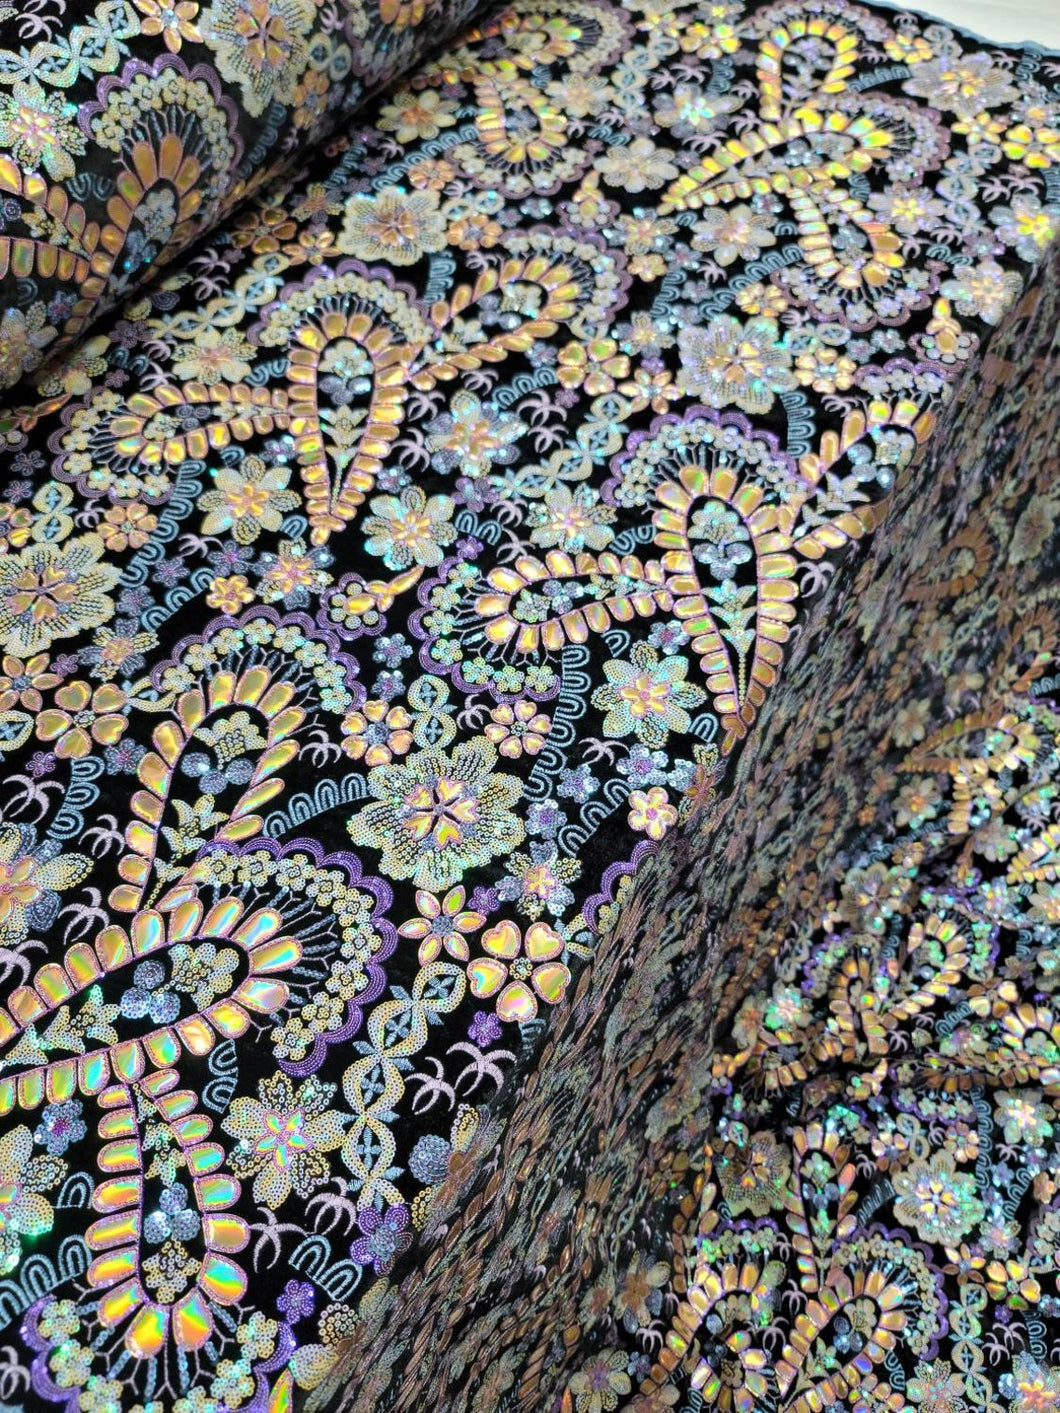 Fabric Sold By The Yard Gold Lace Iridescent Sequin Multicolor Lavender Floral Flowers Embroidery On Black Velvet Fashion Dress Prom Gown